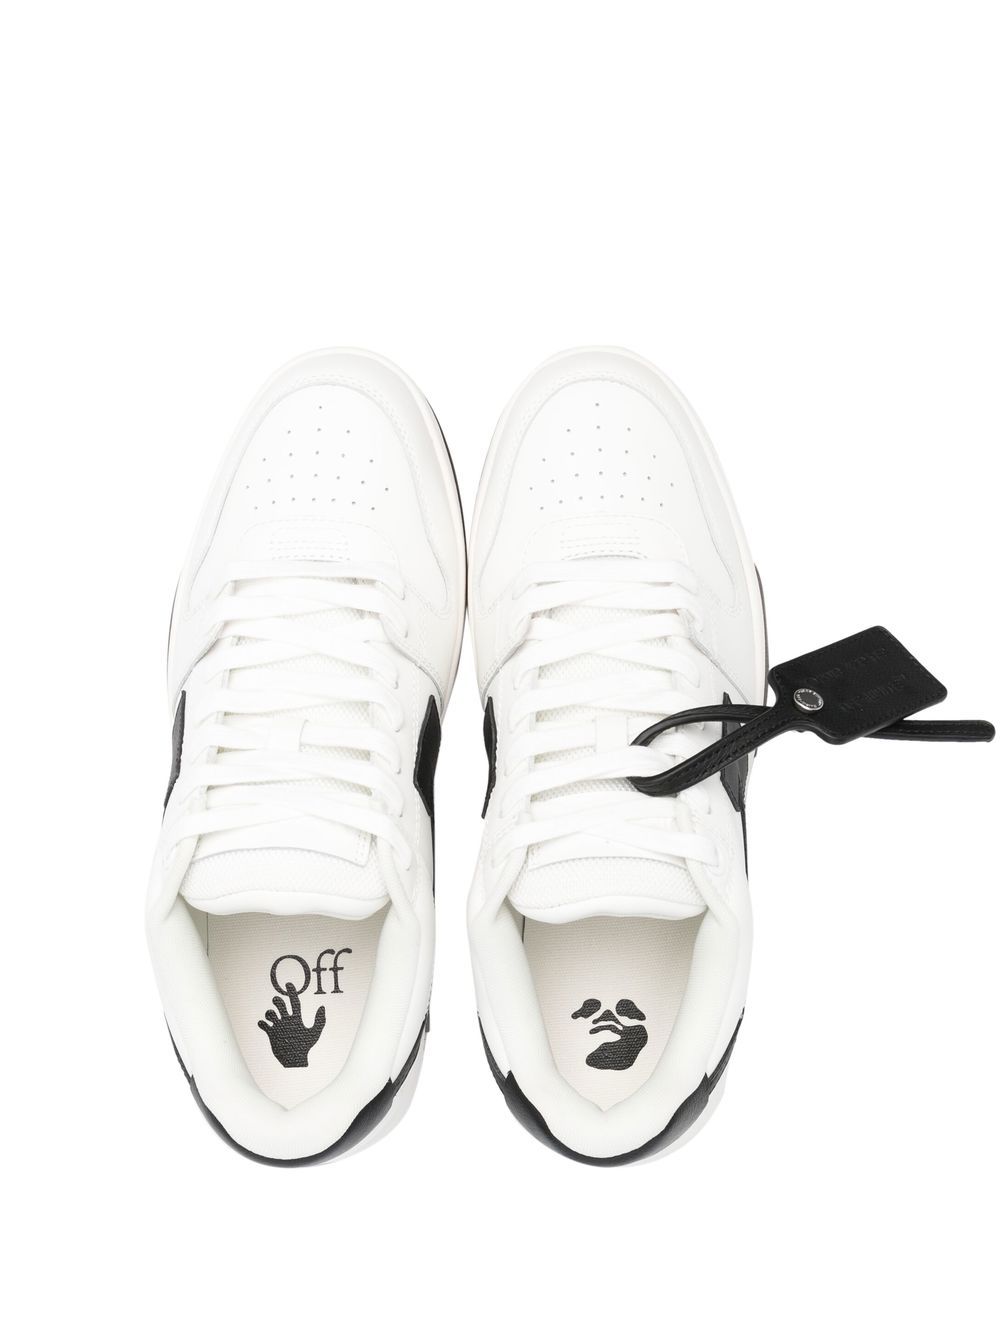 Off-white Baskets Out of Office 'Ooo' Black - Lothaire